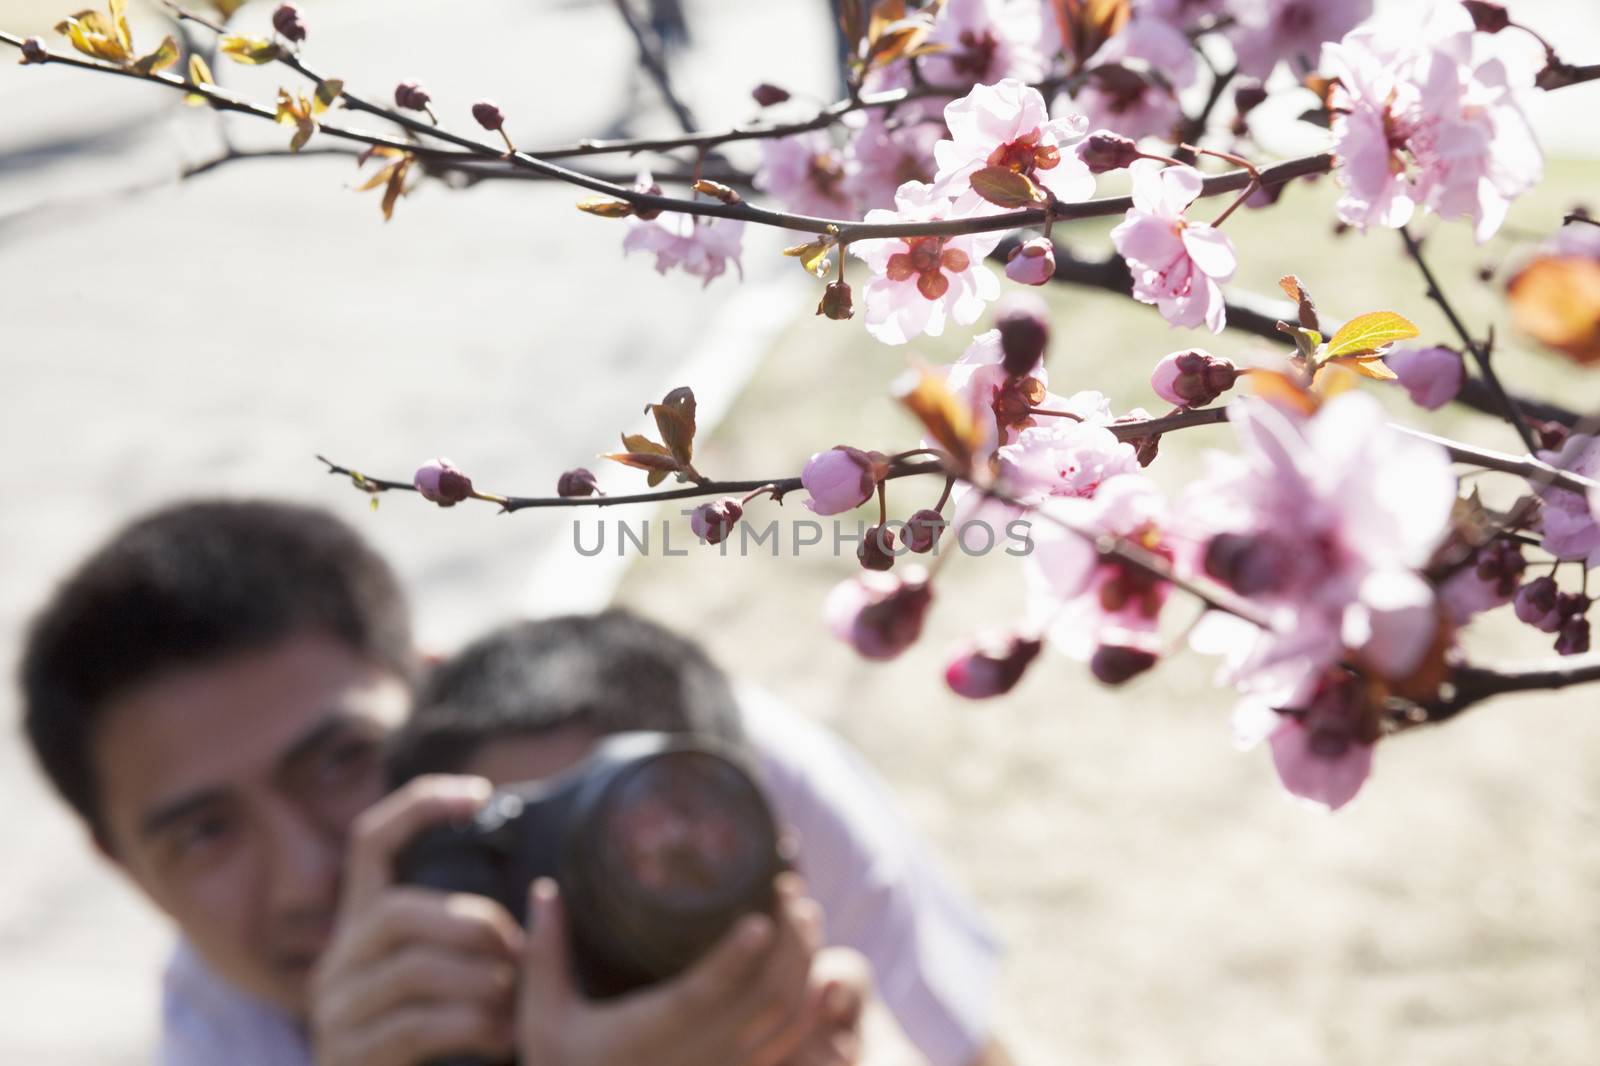 Father helping his son take photographs of the cherry blossoms on the branch, springtime, Beijing by XiXinXing